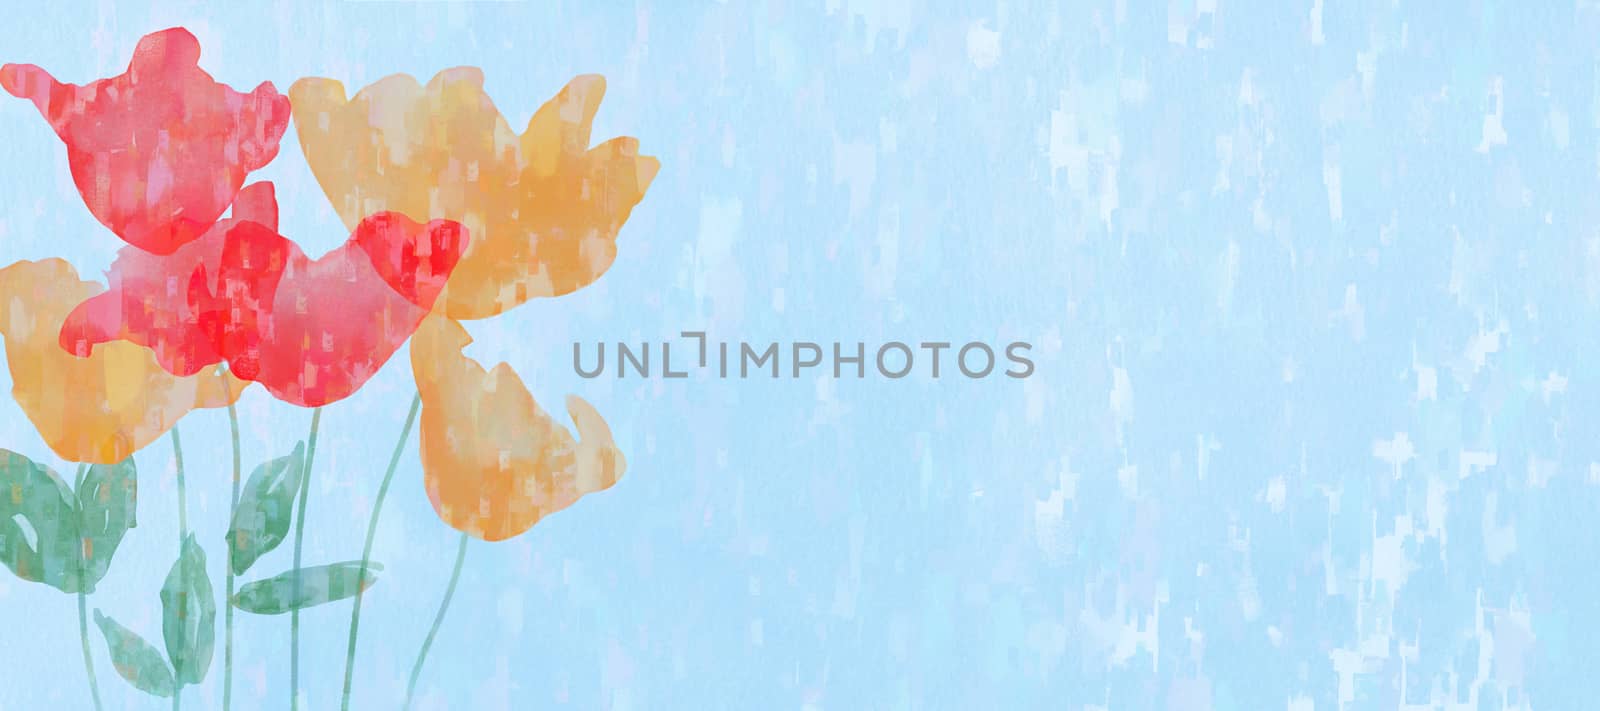 Digital painting of red poppies on blue background